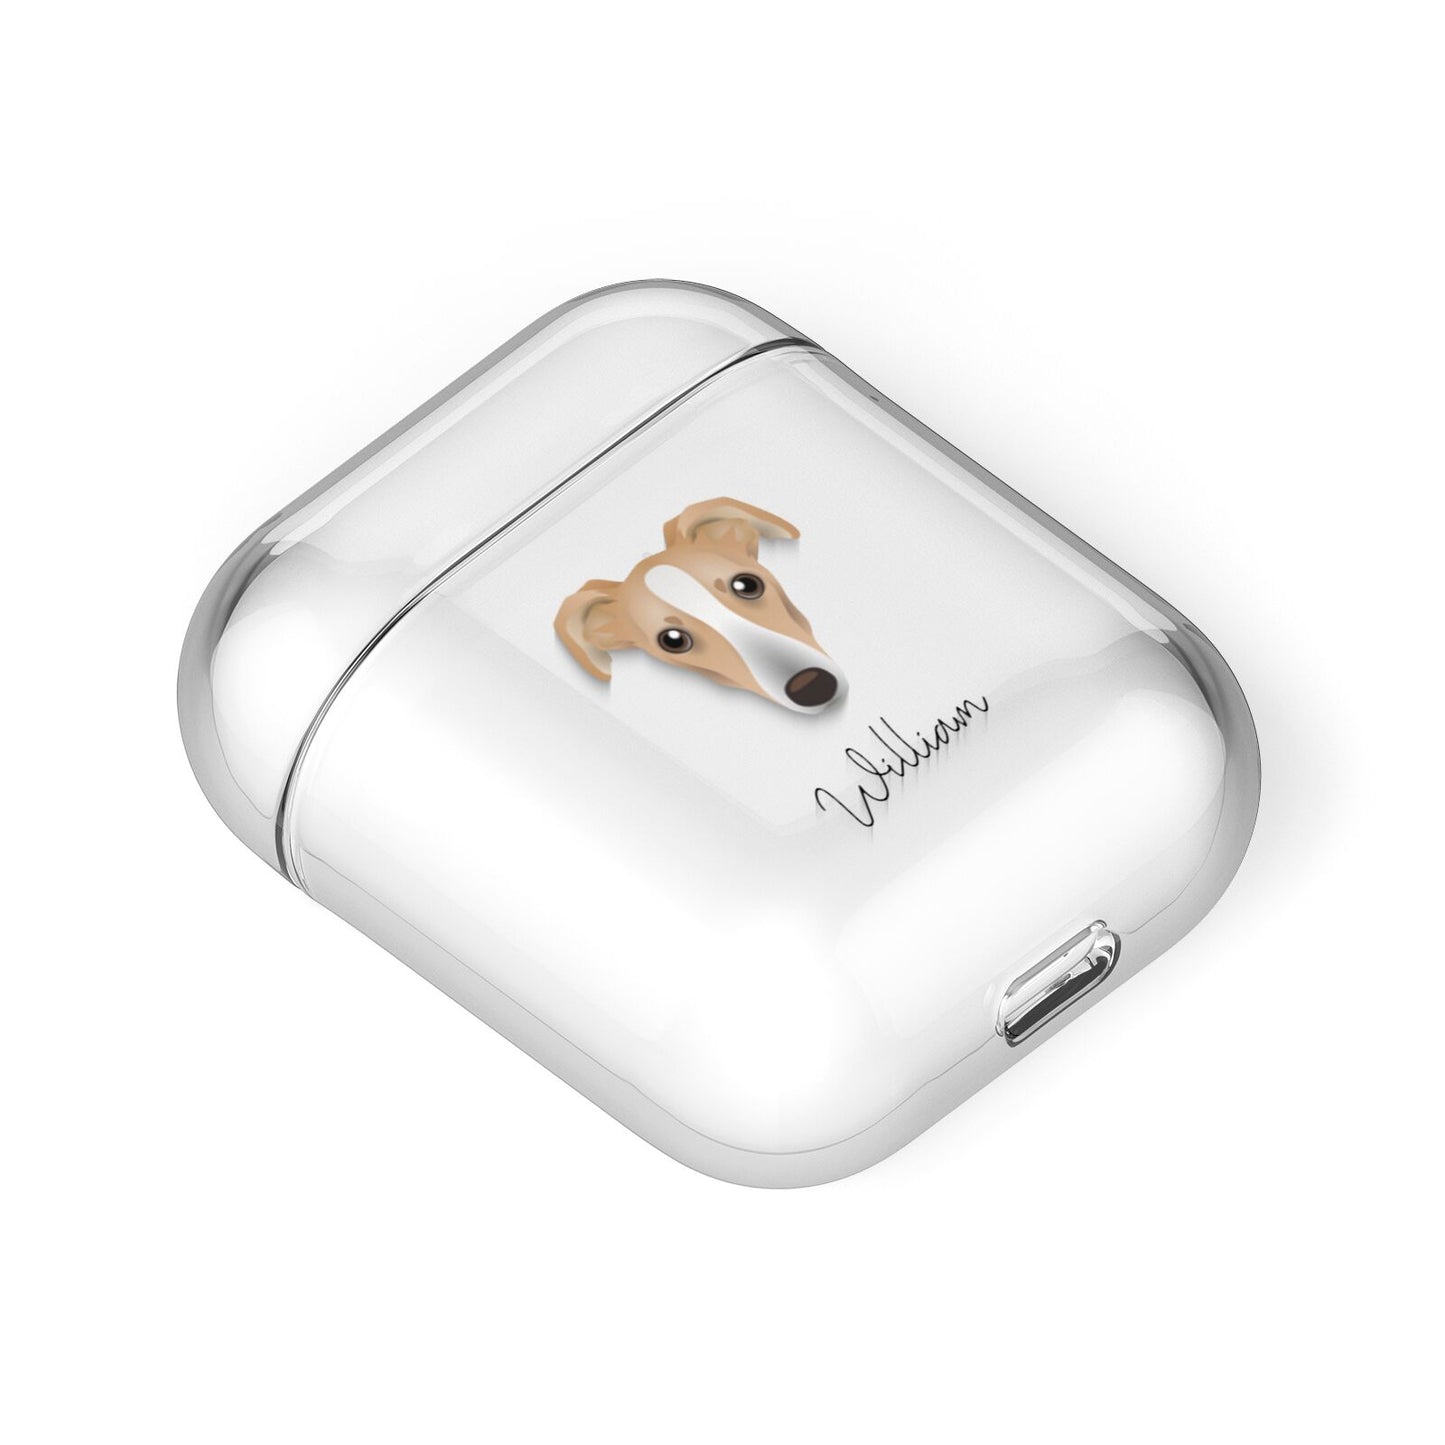 Lurcher Personalised AirPods Case Laid Flat